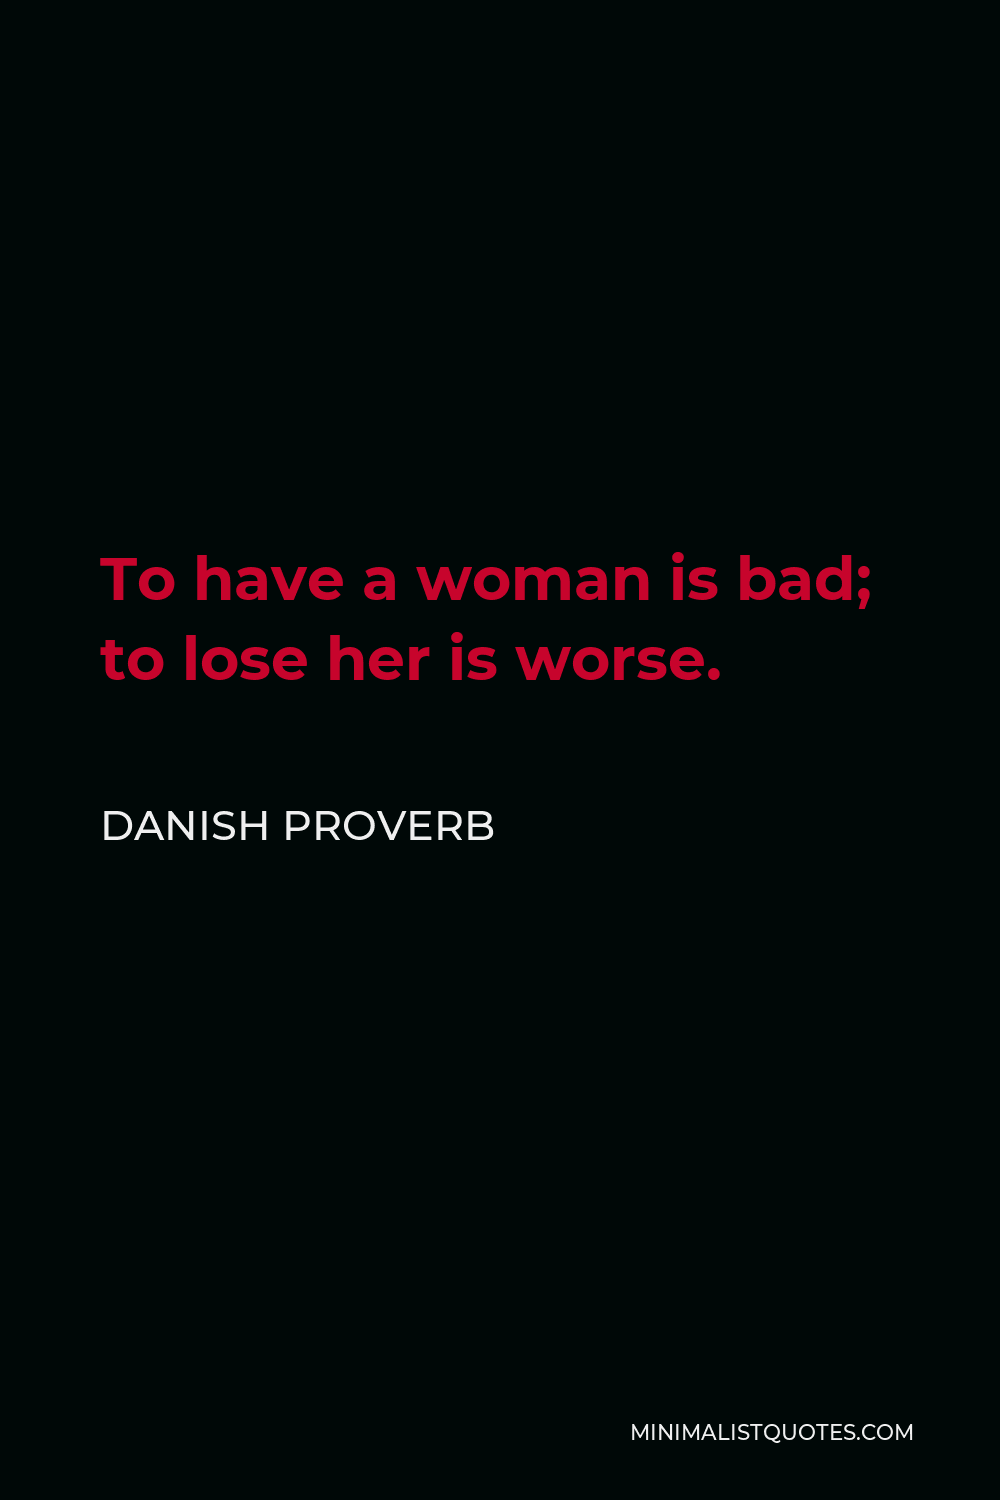 Danish Proverb Quote - To have a woman is bad; to lose her is worse.